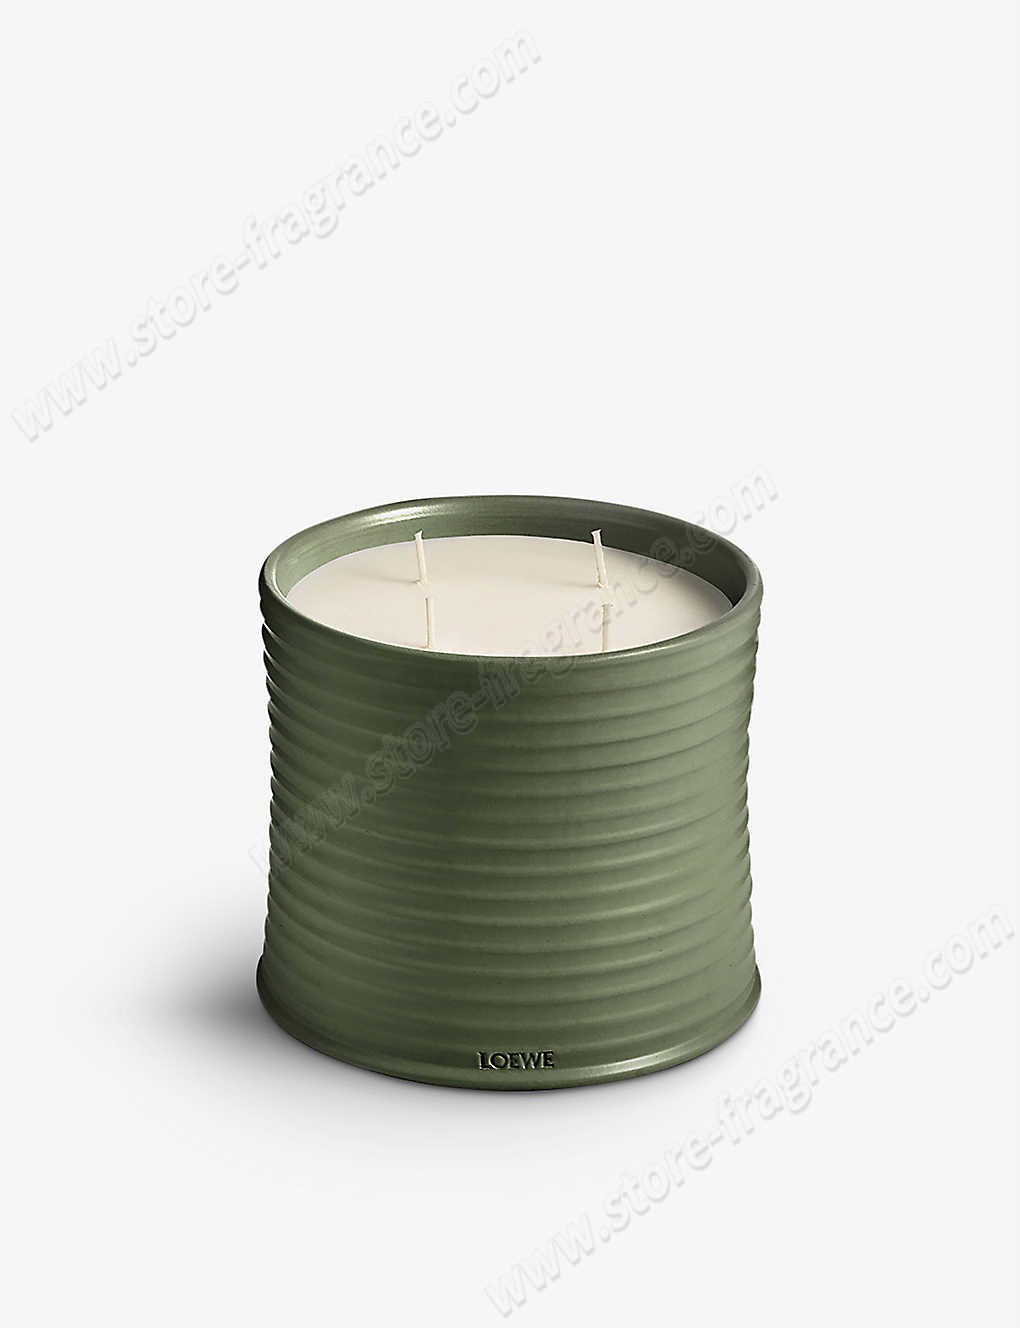 LOEWE/Scent of Marihuana large scented candle 2.12kg ✿ Discount Store - -0